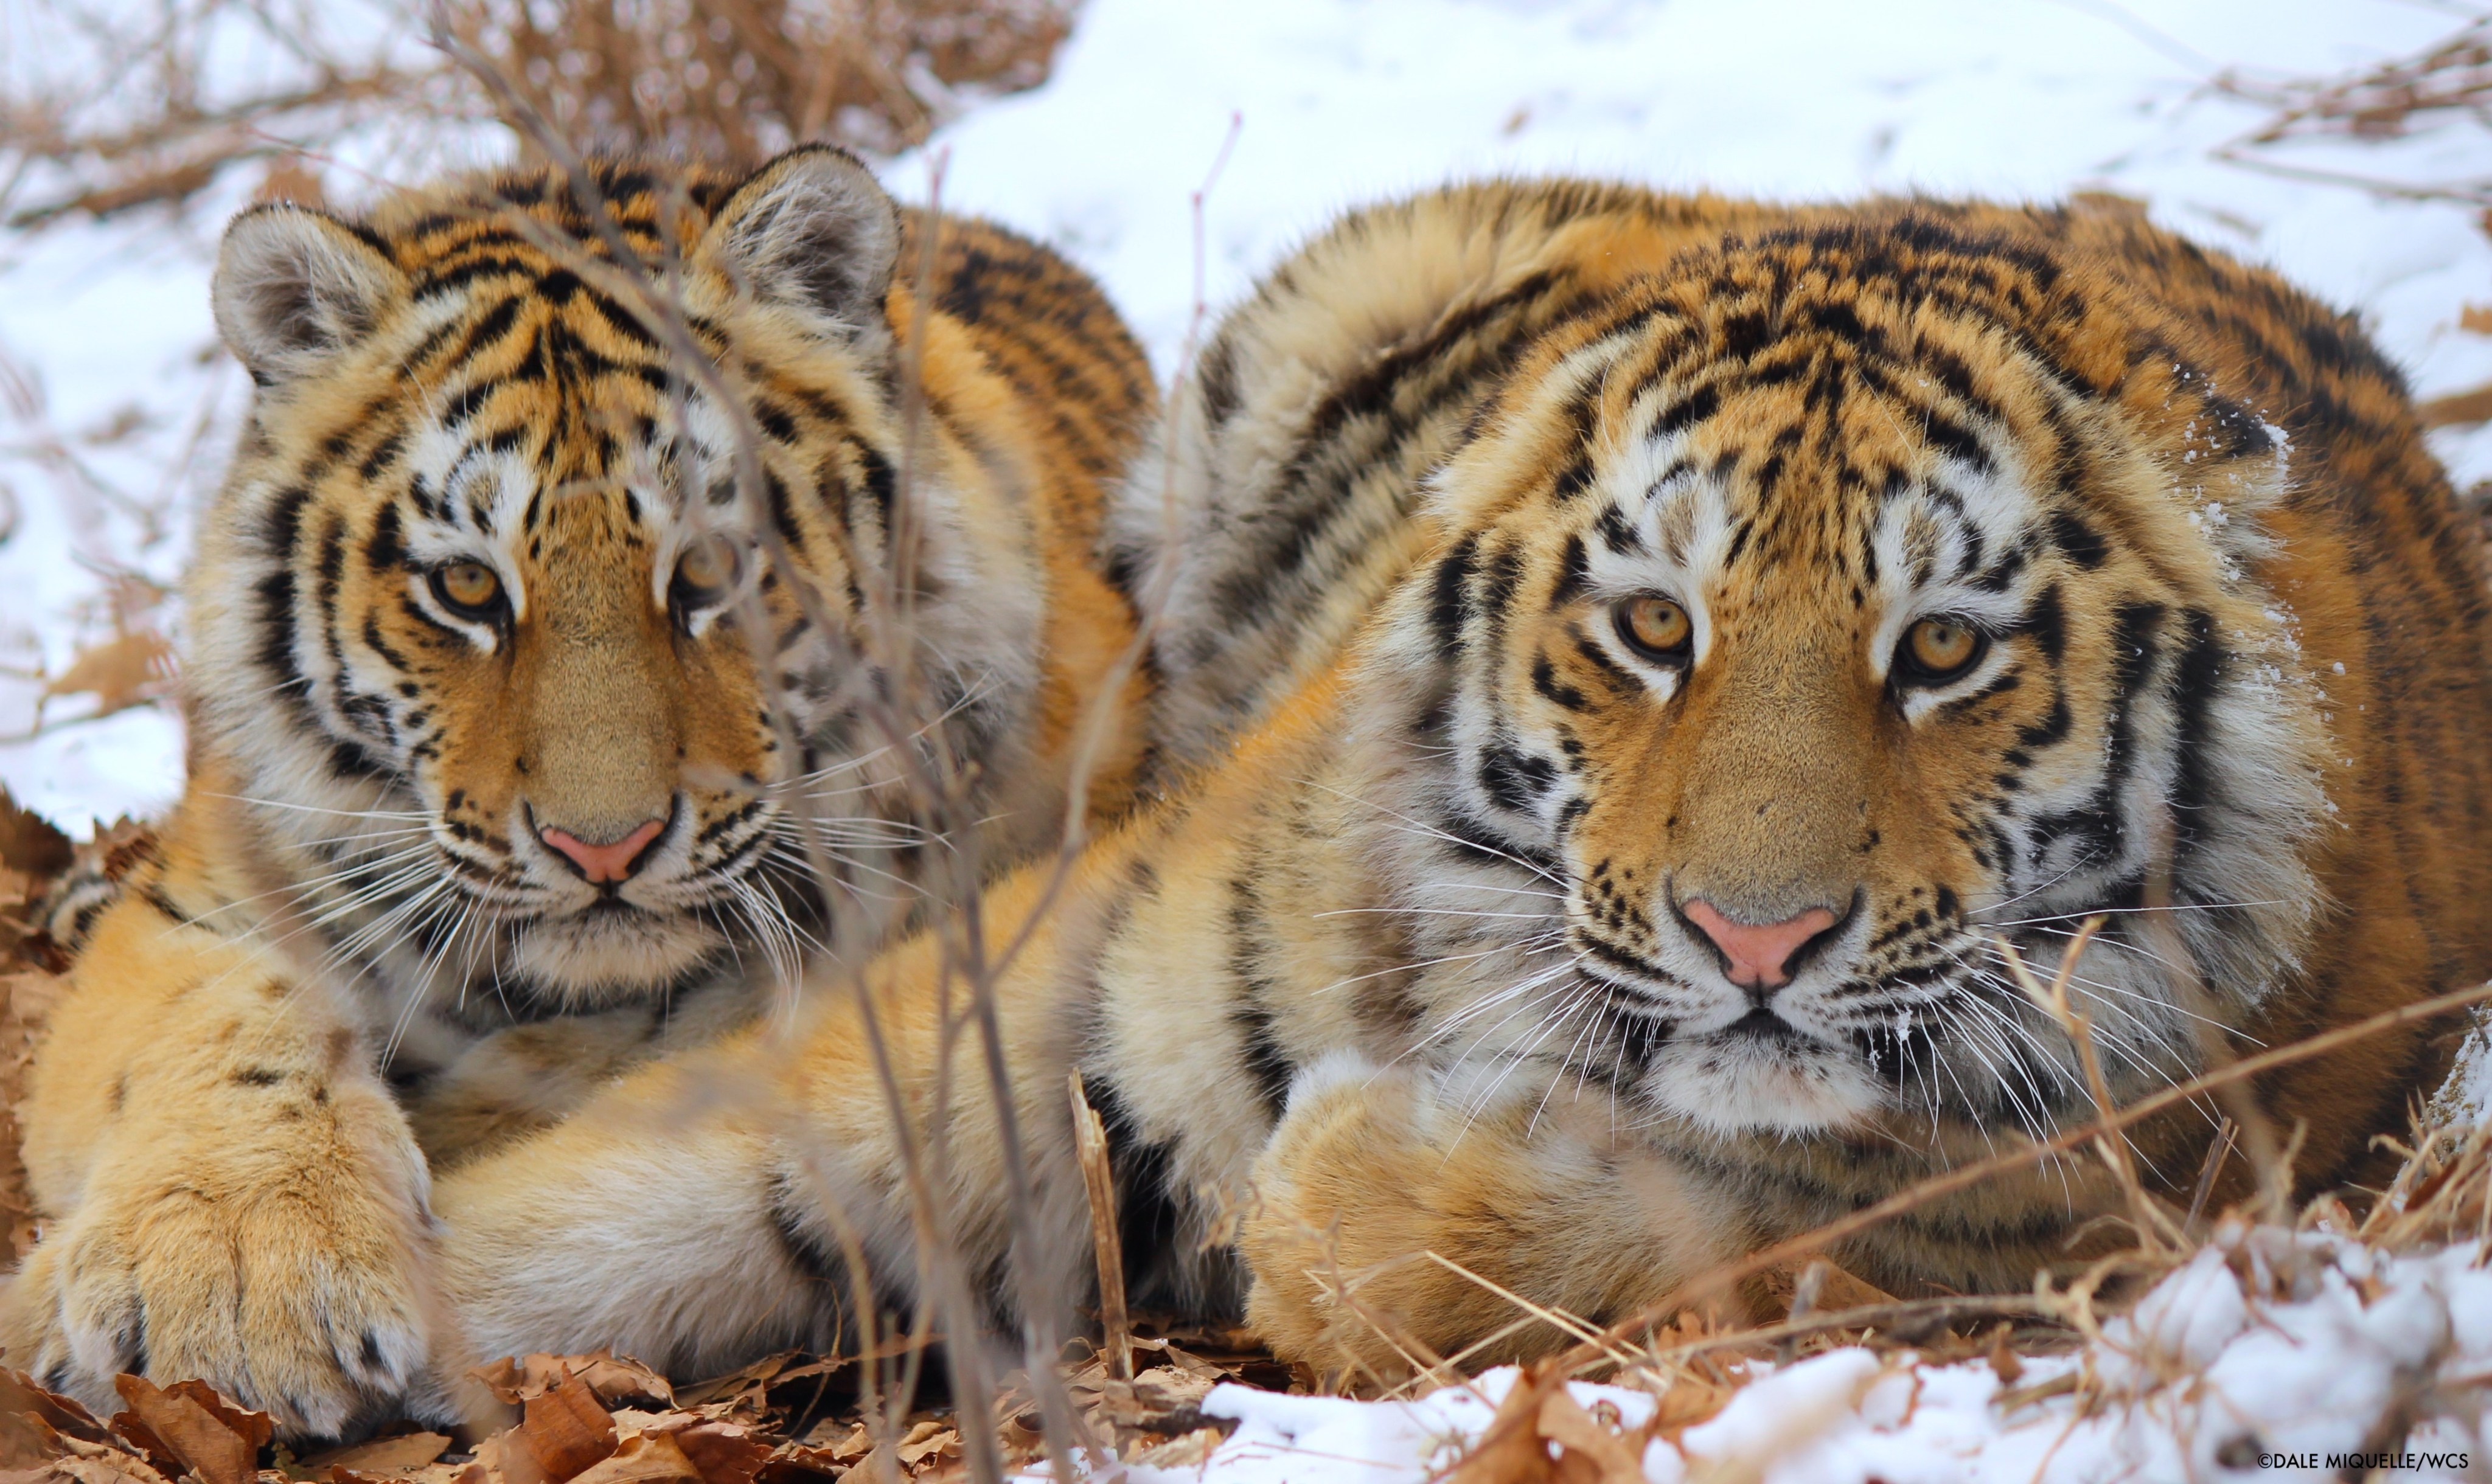 Two orange and black-striped tigers rest on their bellies in snow and look directly at the camera.